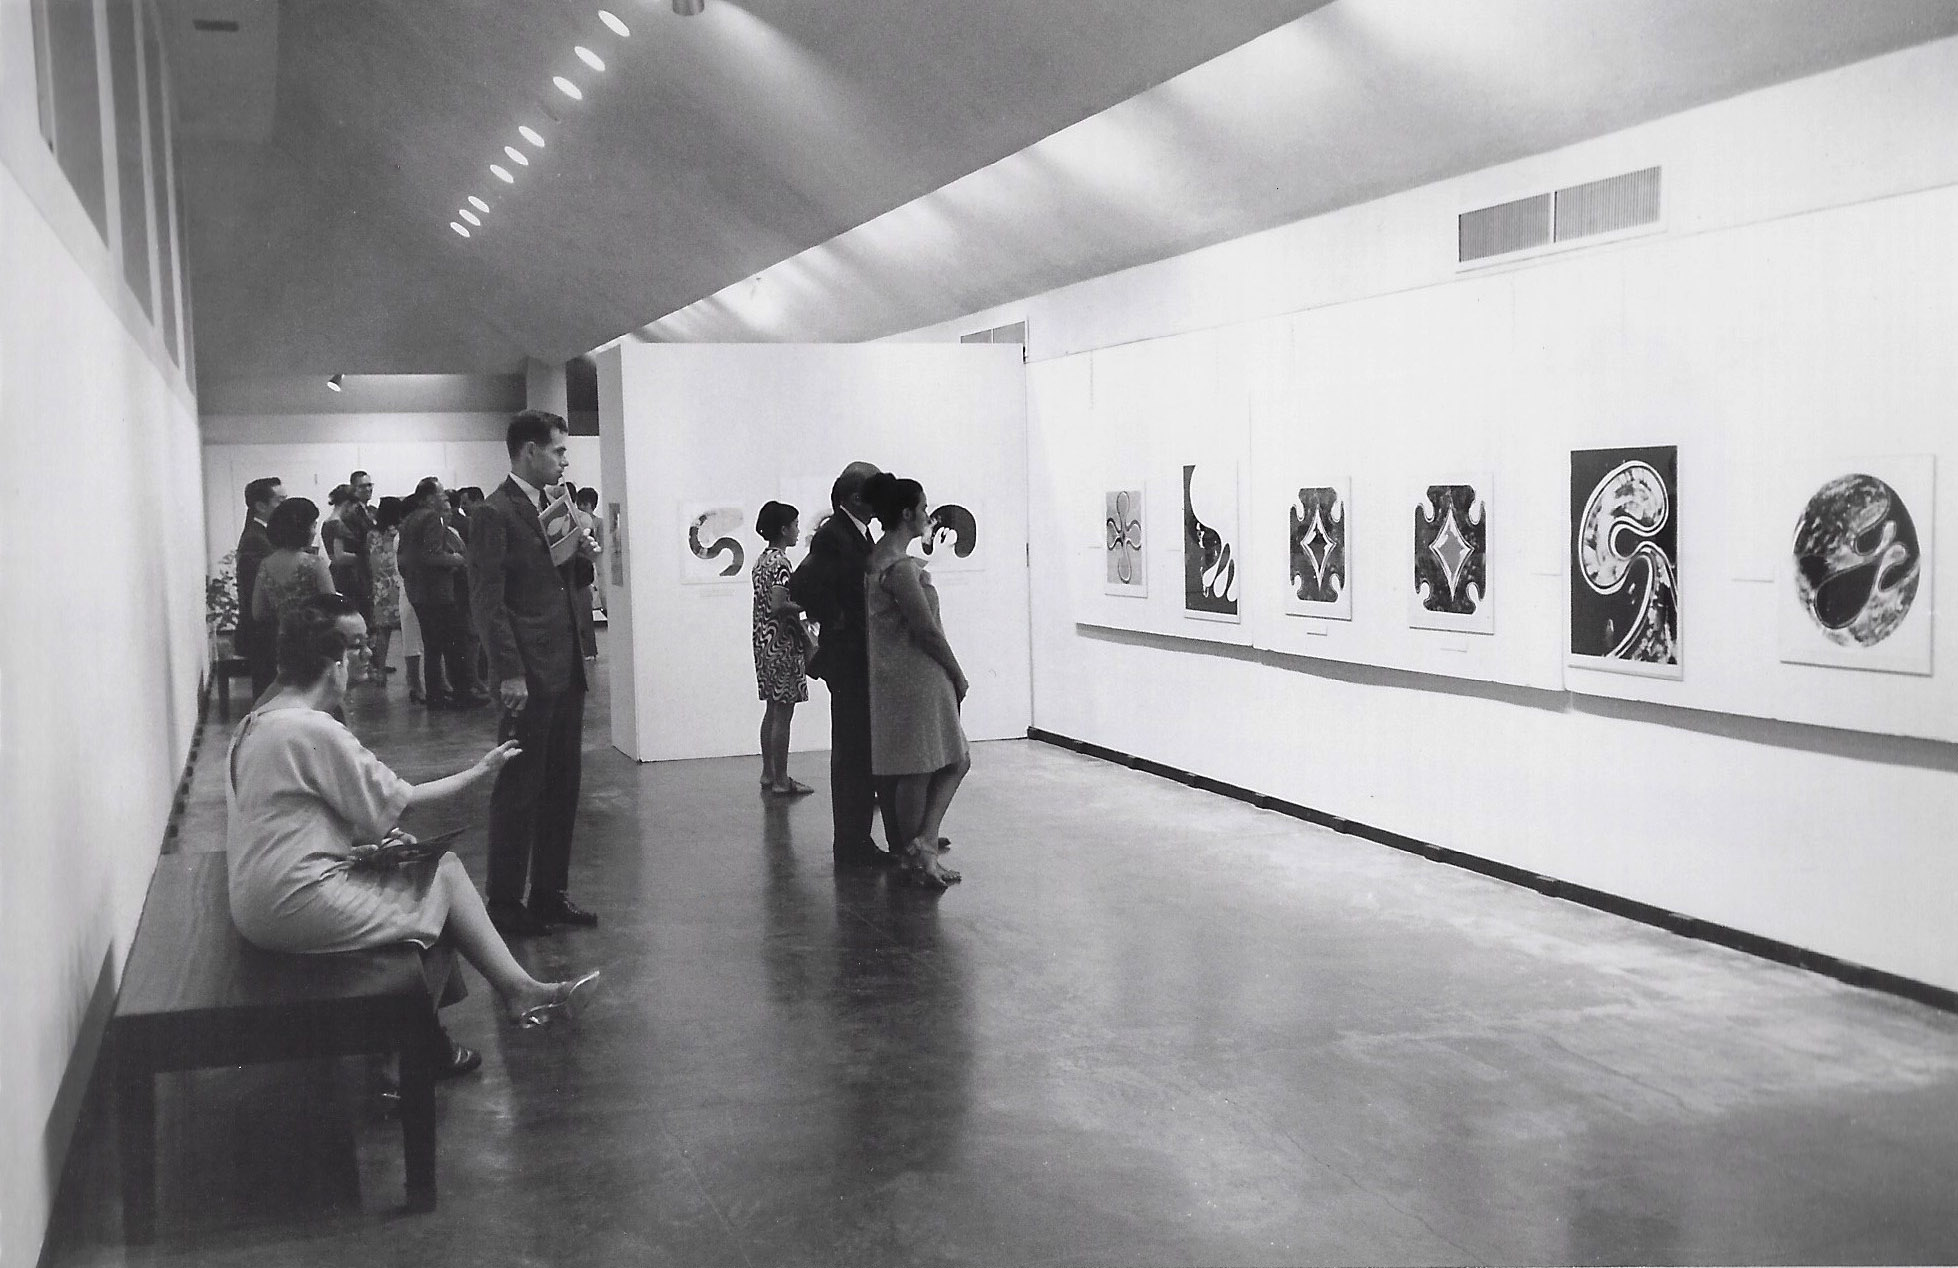  Exhibition of works by Kanemitsu at the Honolulu Academy of Arts, 1967. 